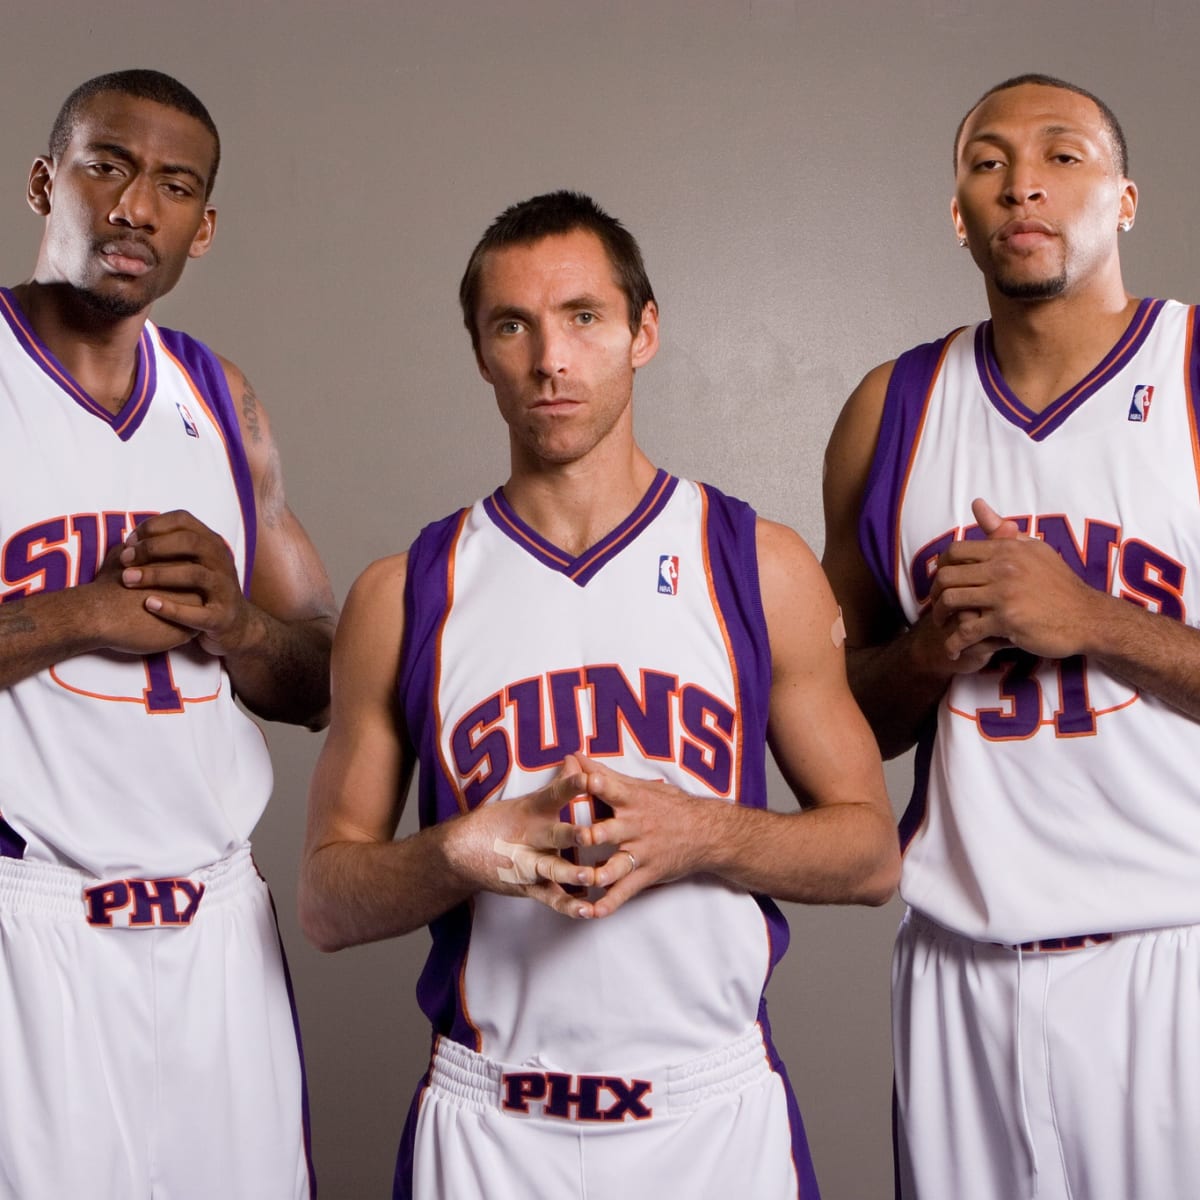 Shawn Marion and Amar'e Stoudemire to have their jerseys retired at the  Phoenix Suns